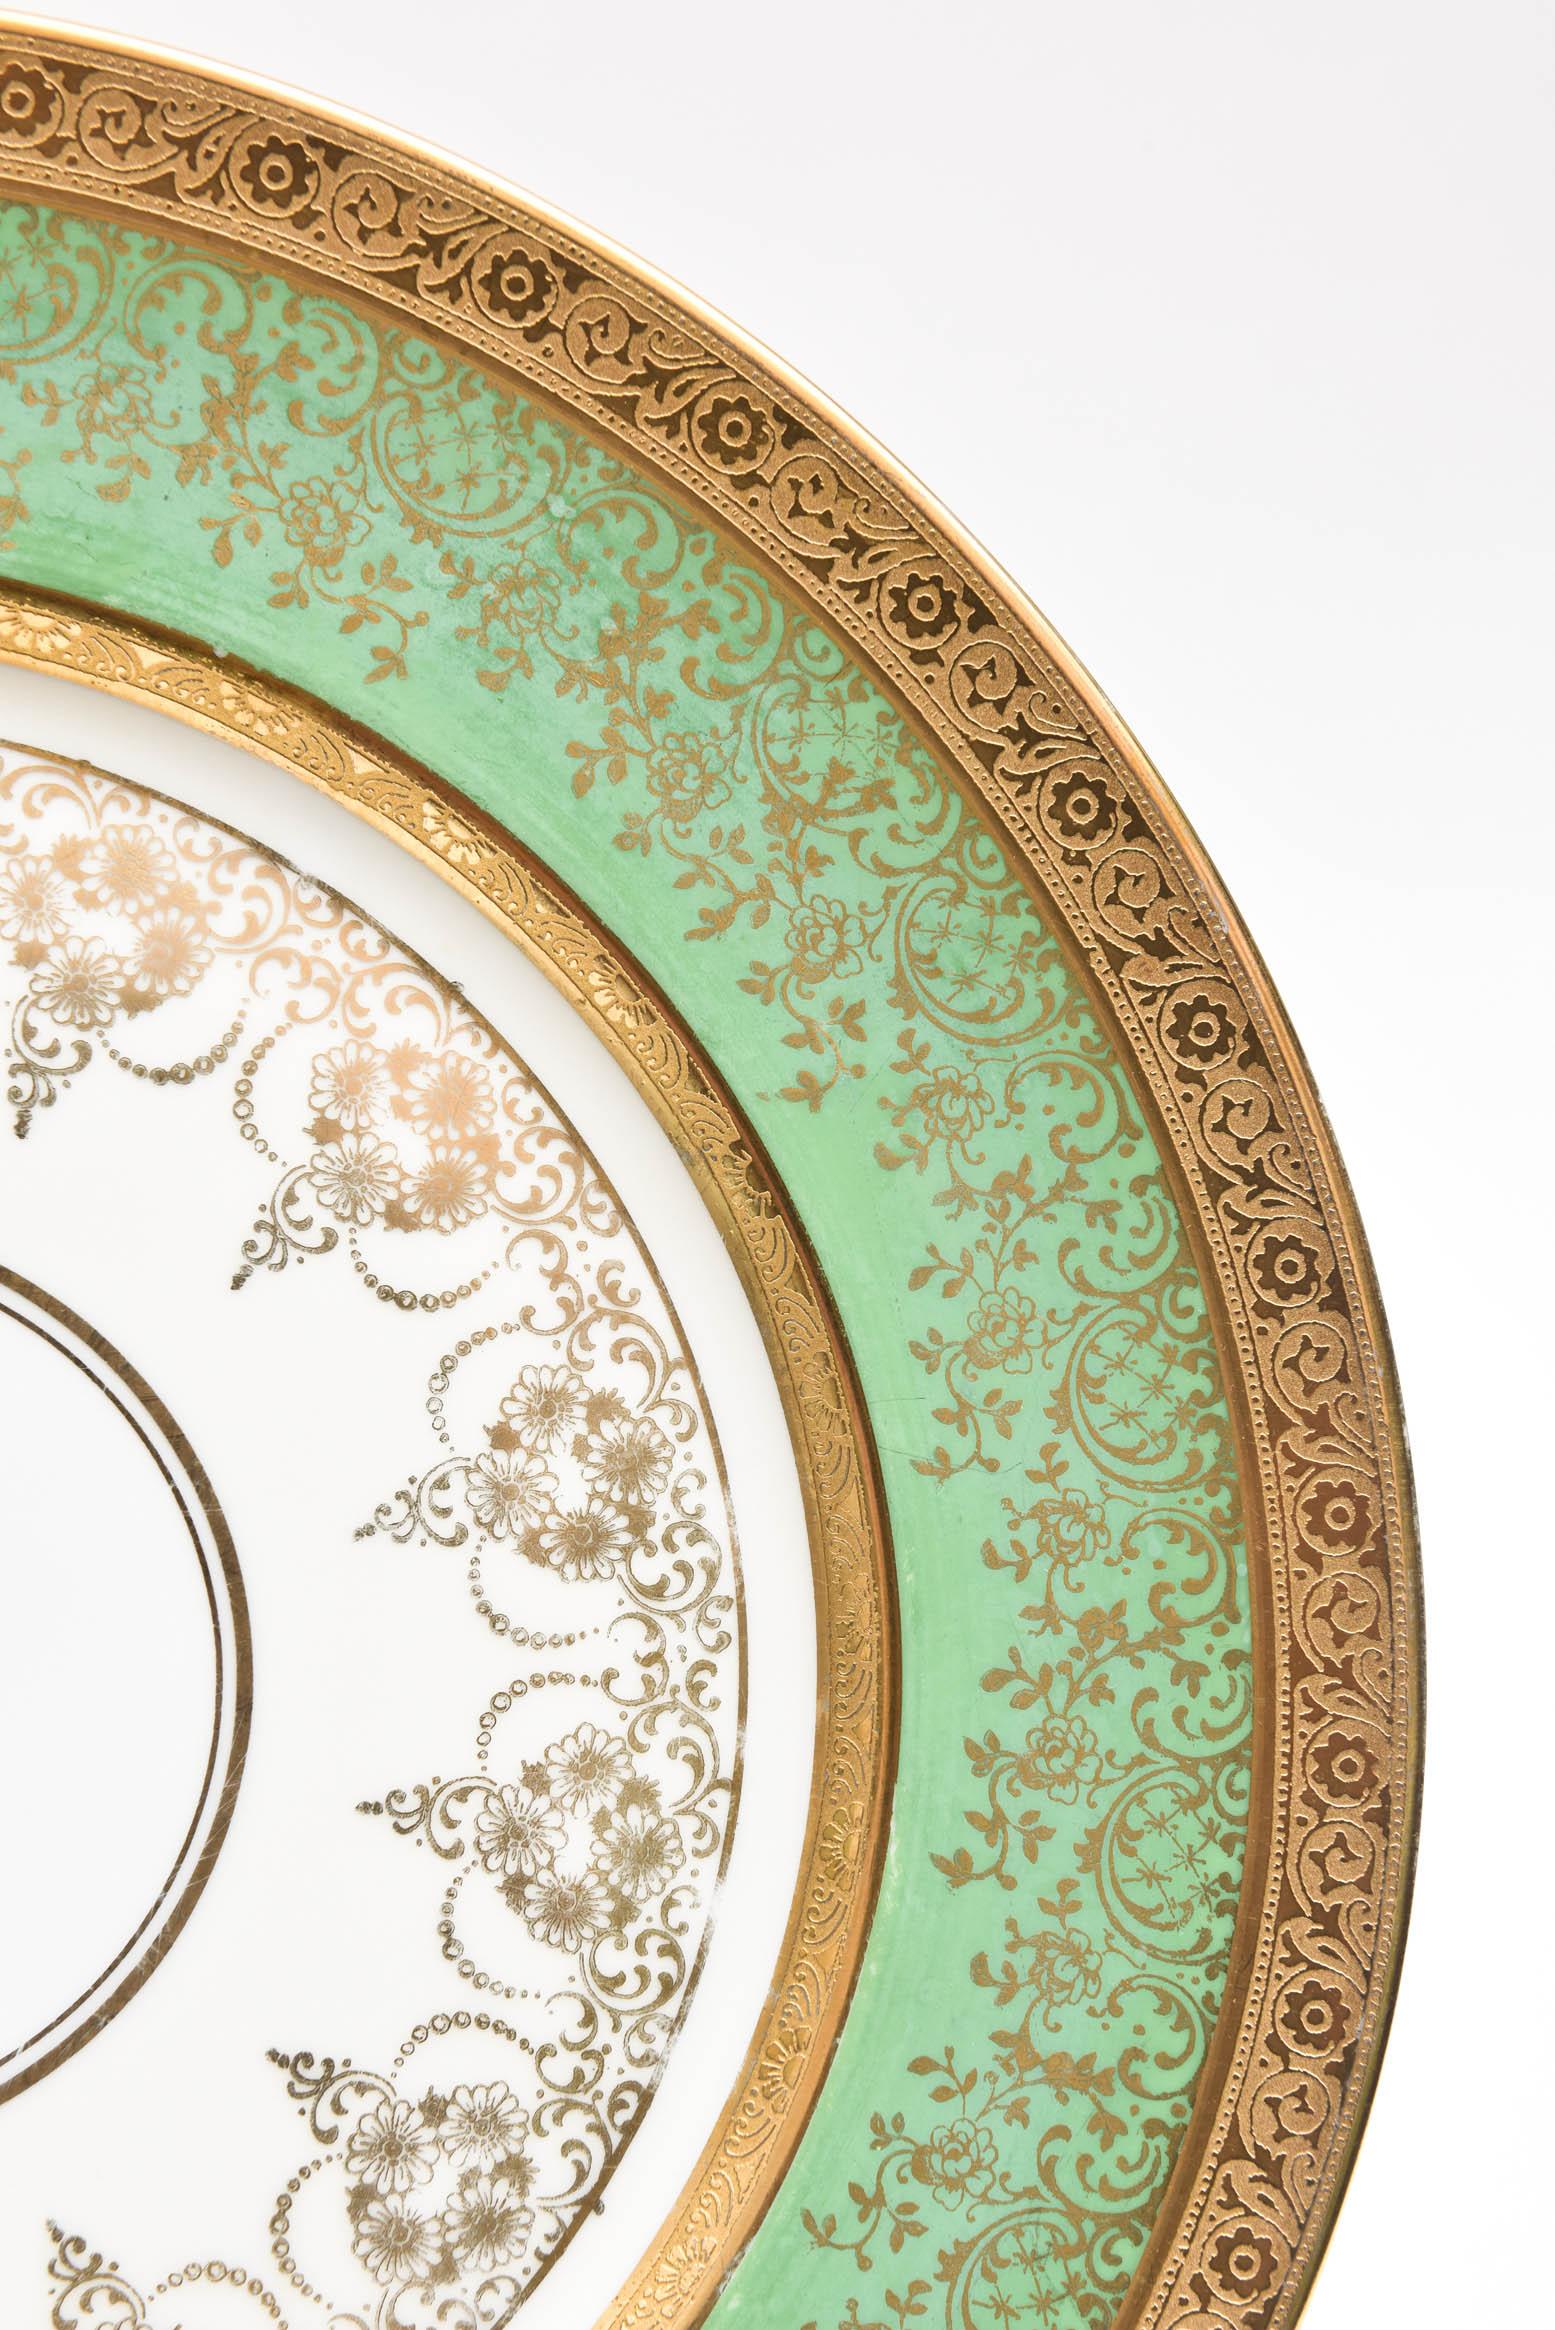 A vibrant colored set of 12 generously proportioned dinner, presentation or charger plates ready to mix and match in with all your Fine tabletop. This set features a dark green collar with all-over gilt foliate decoration that flows to the center of